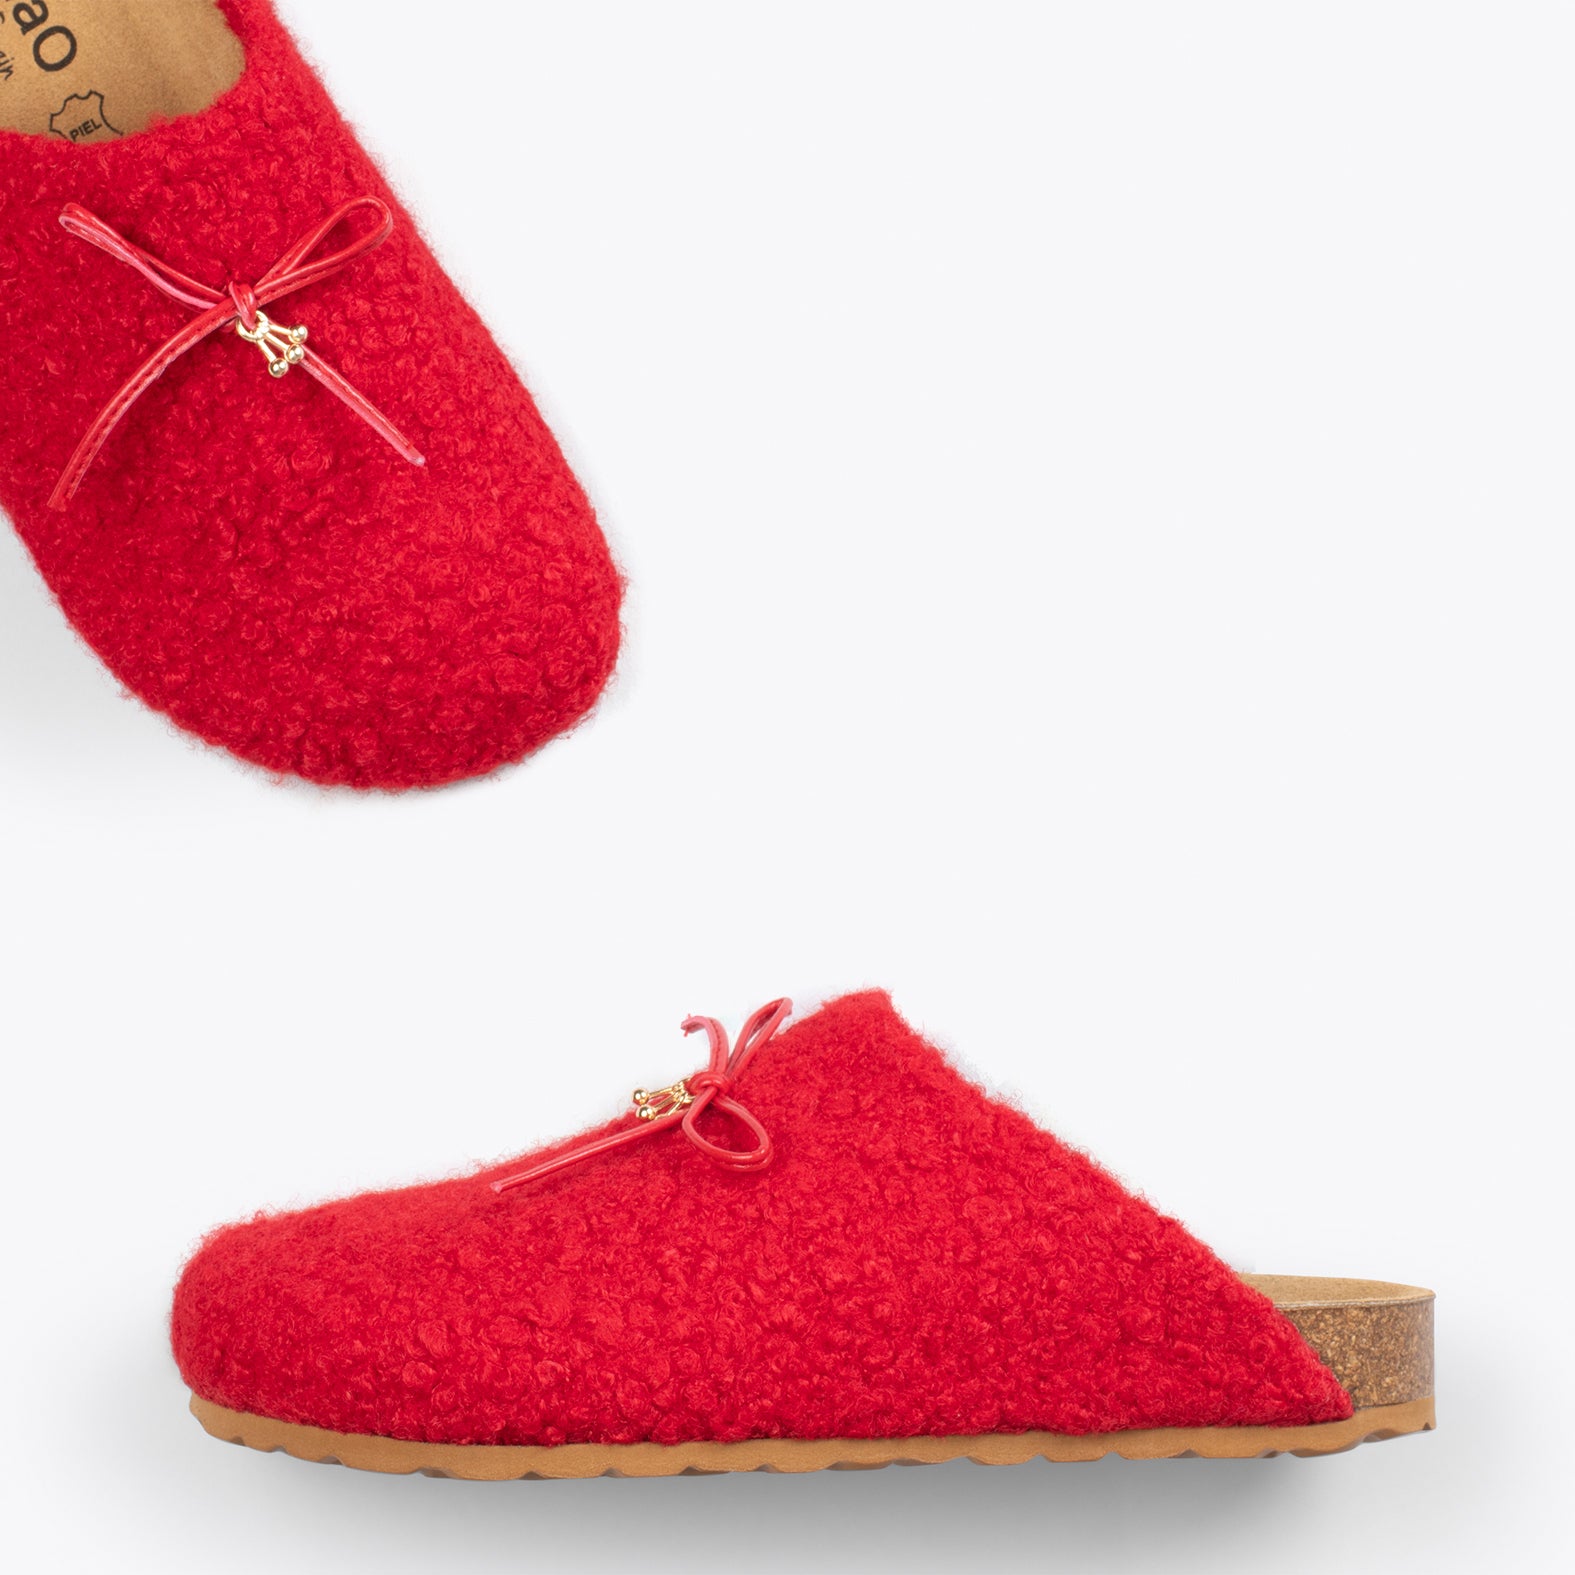 SWEET DREAMS – RED felt home slipper with ribbon